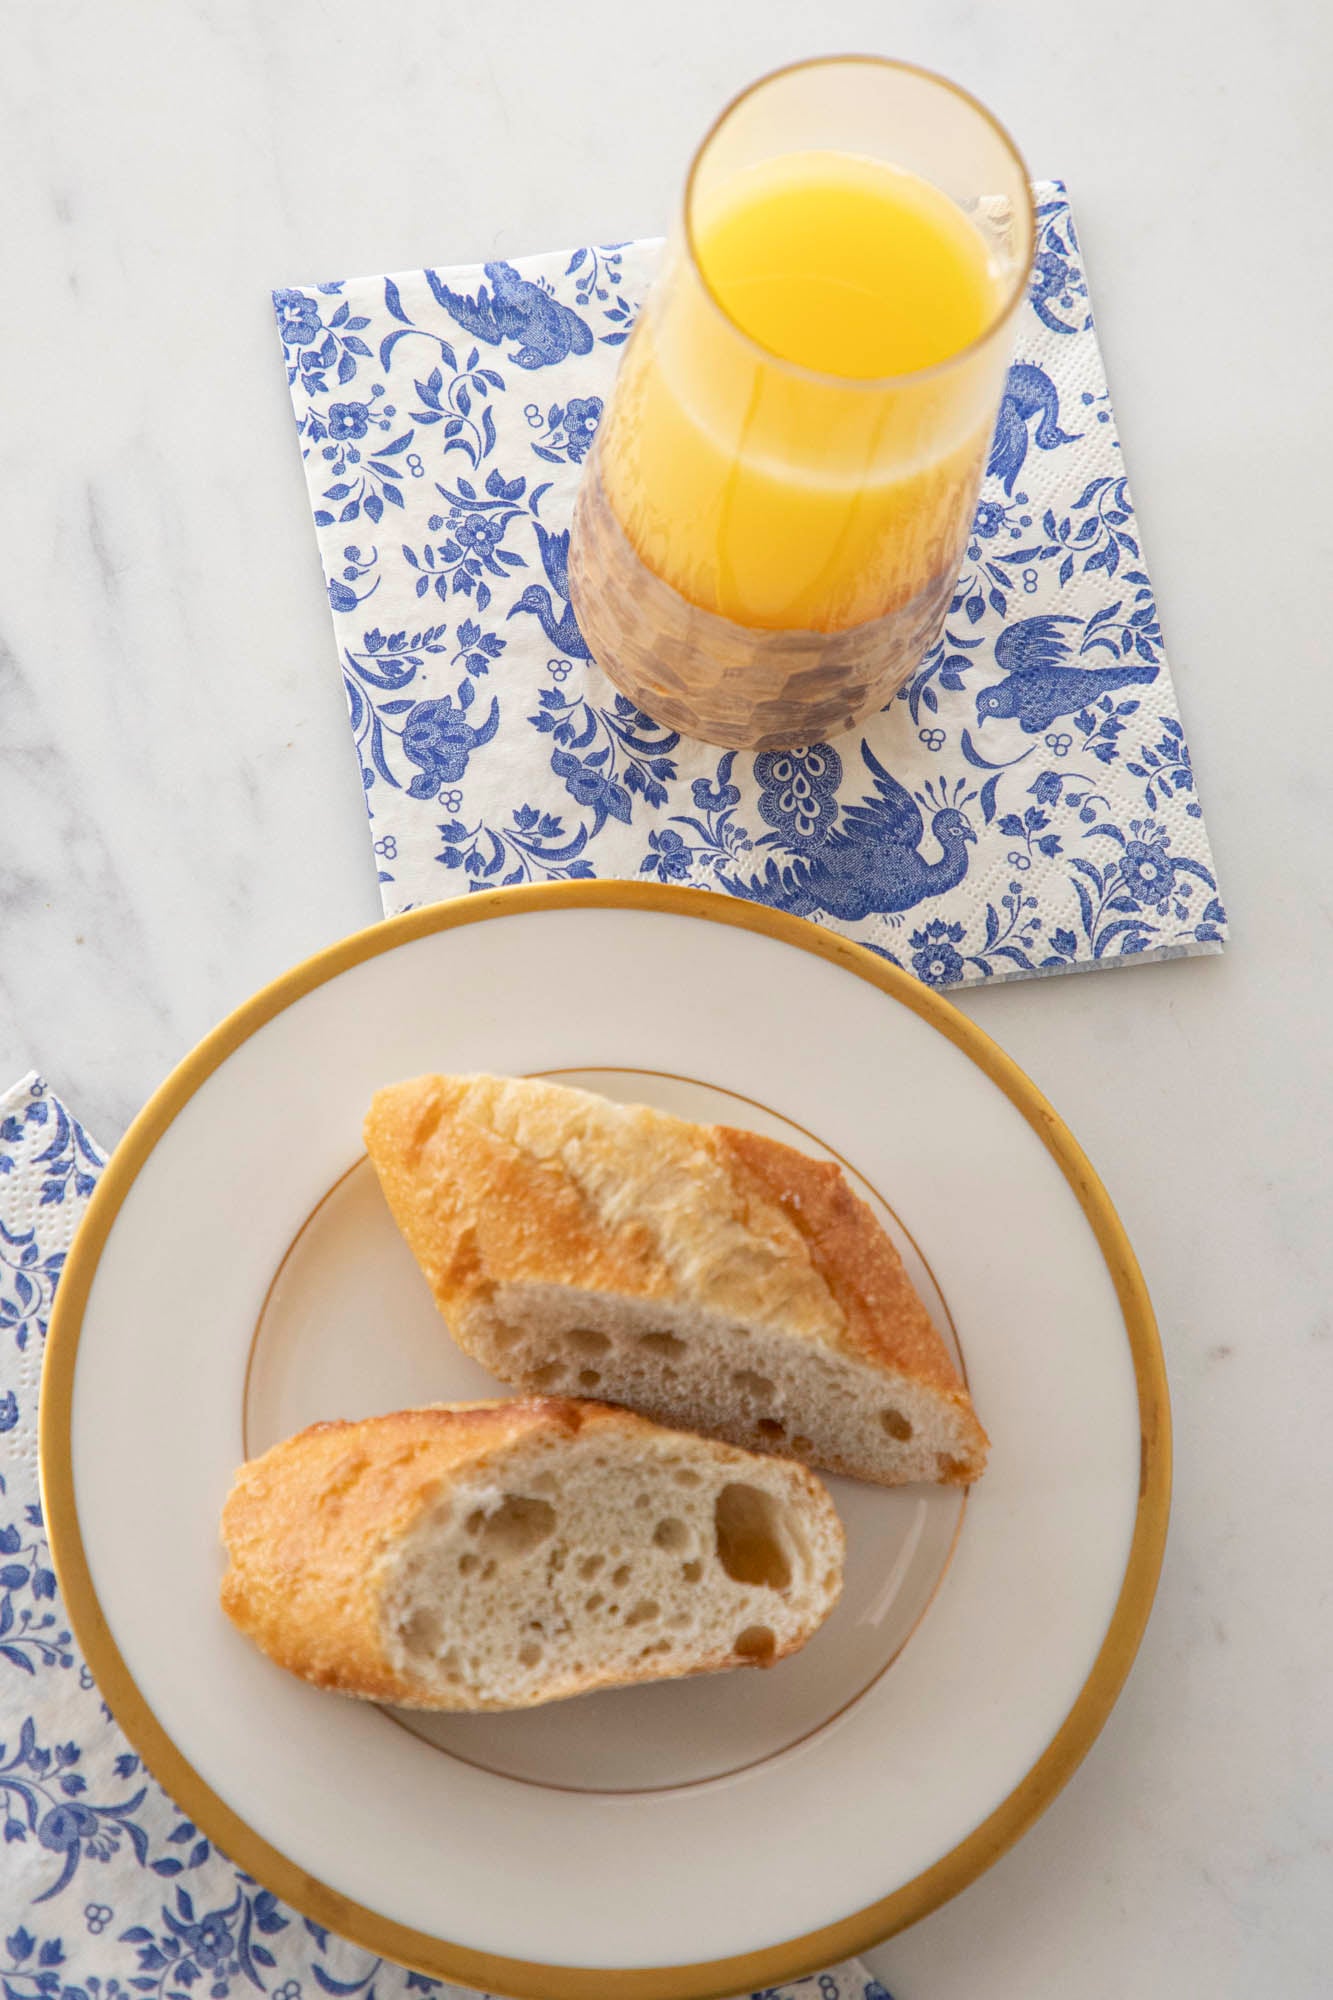 A plate of bread and a glass of orange juice, accompanied by Blue Regal Peacock Napkins from Hester &amp; Cook and decorated with a bird pattern.